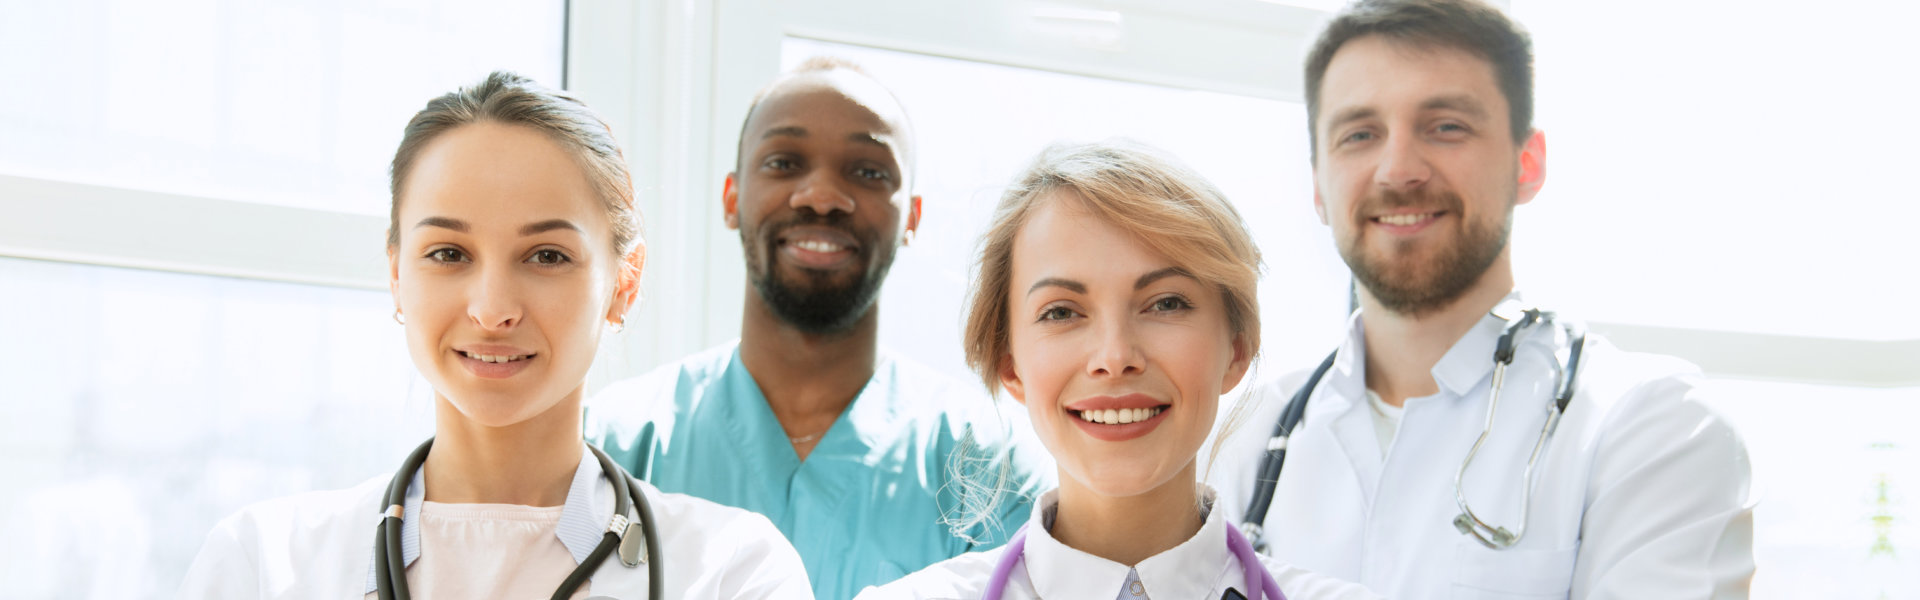 group of medical staff smiling